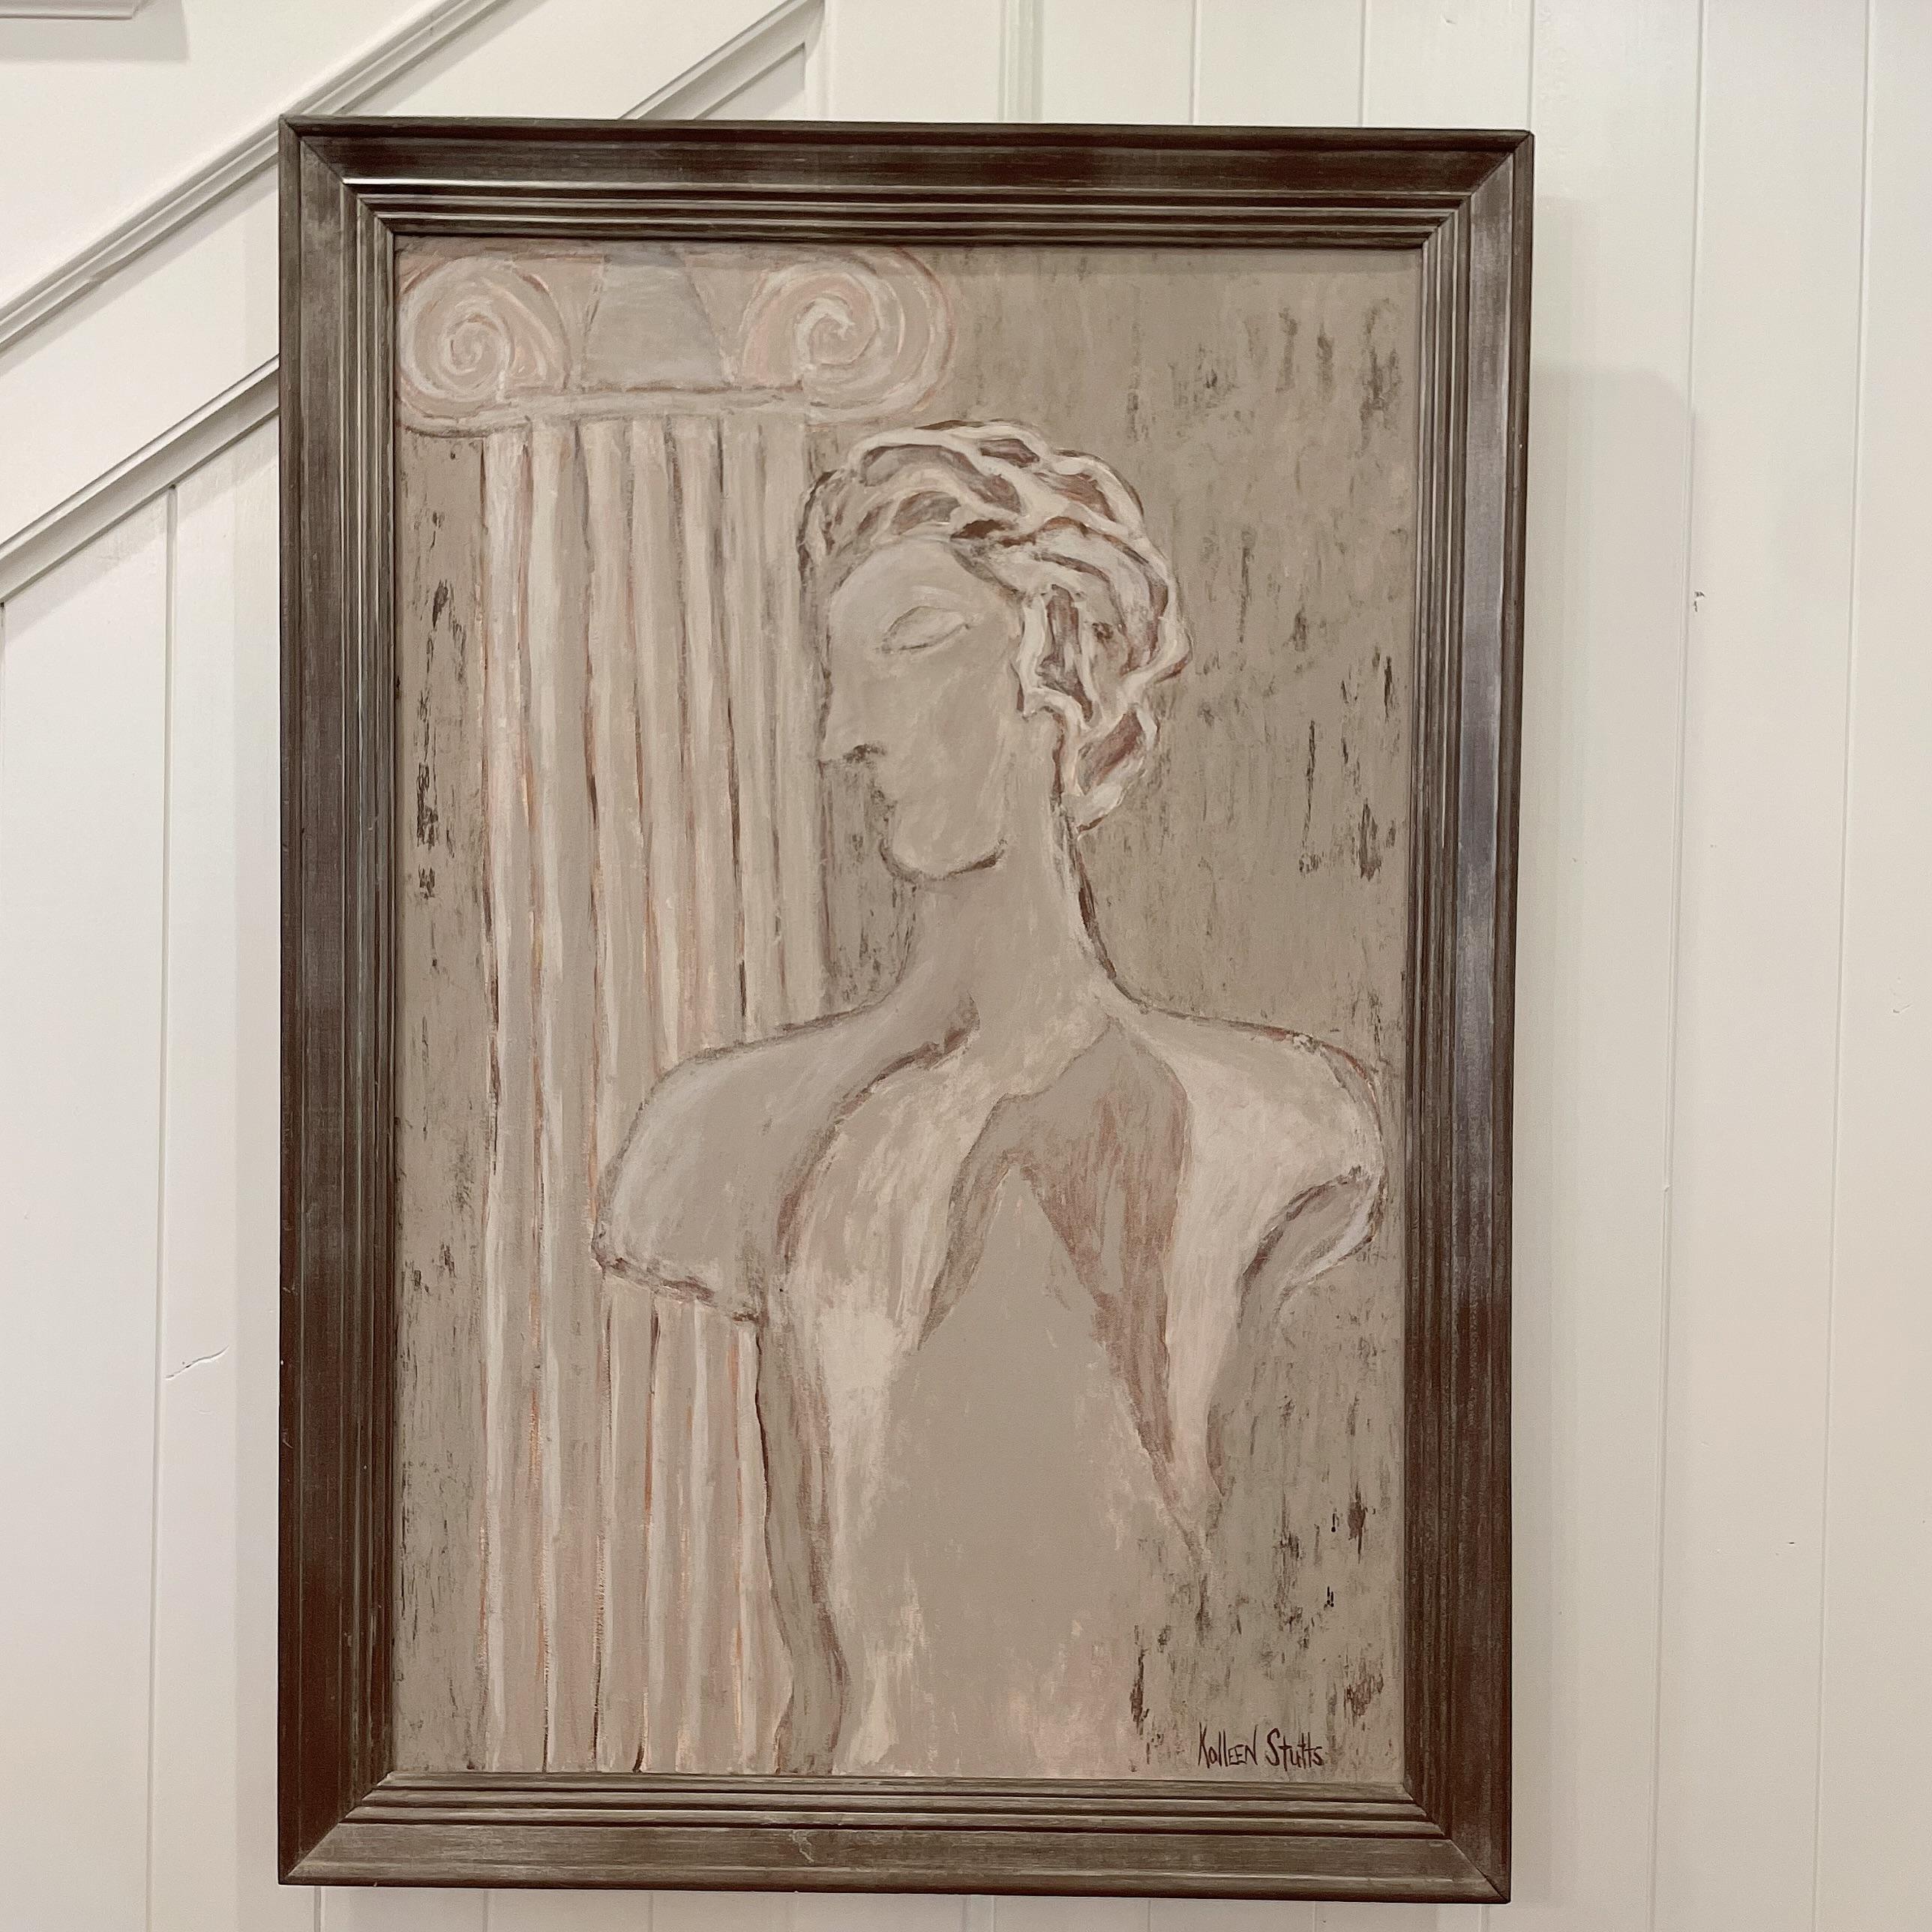 Very interesting and eye catching large Impressionist Original Painting of         Renaissance interpretation of an ancient Greek theme - Statue of David and a Column Signed by artist Kolleen Stutts and Framed in an aged wood frame.